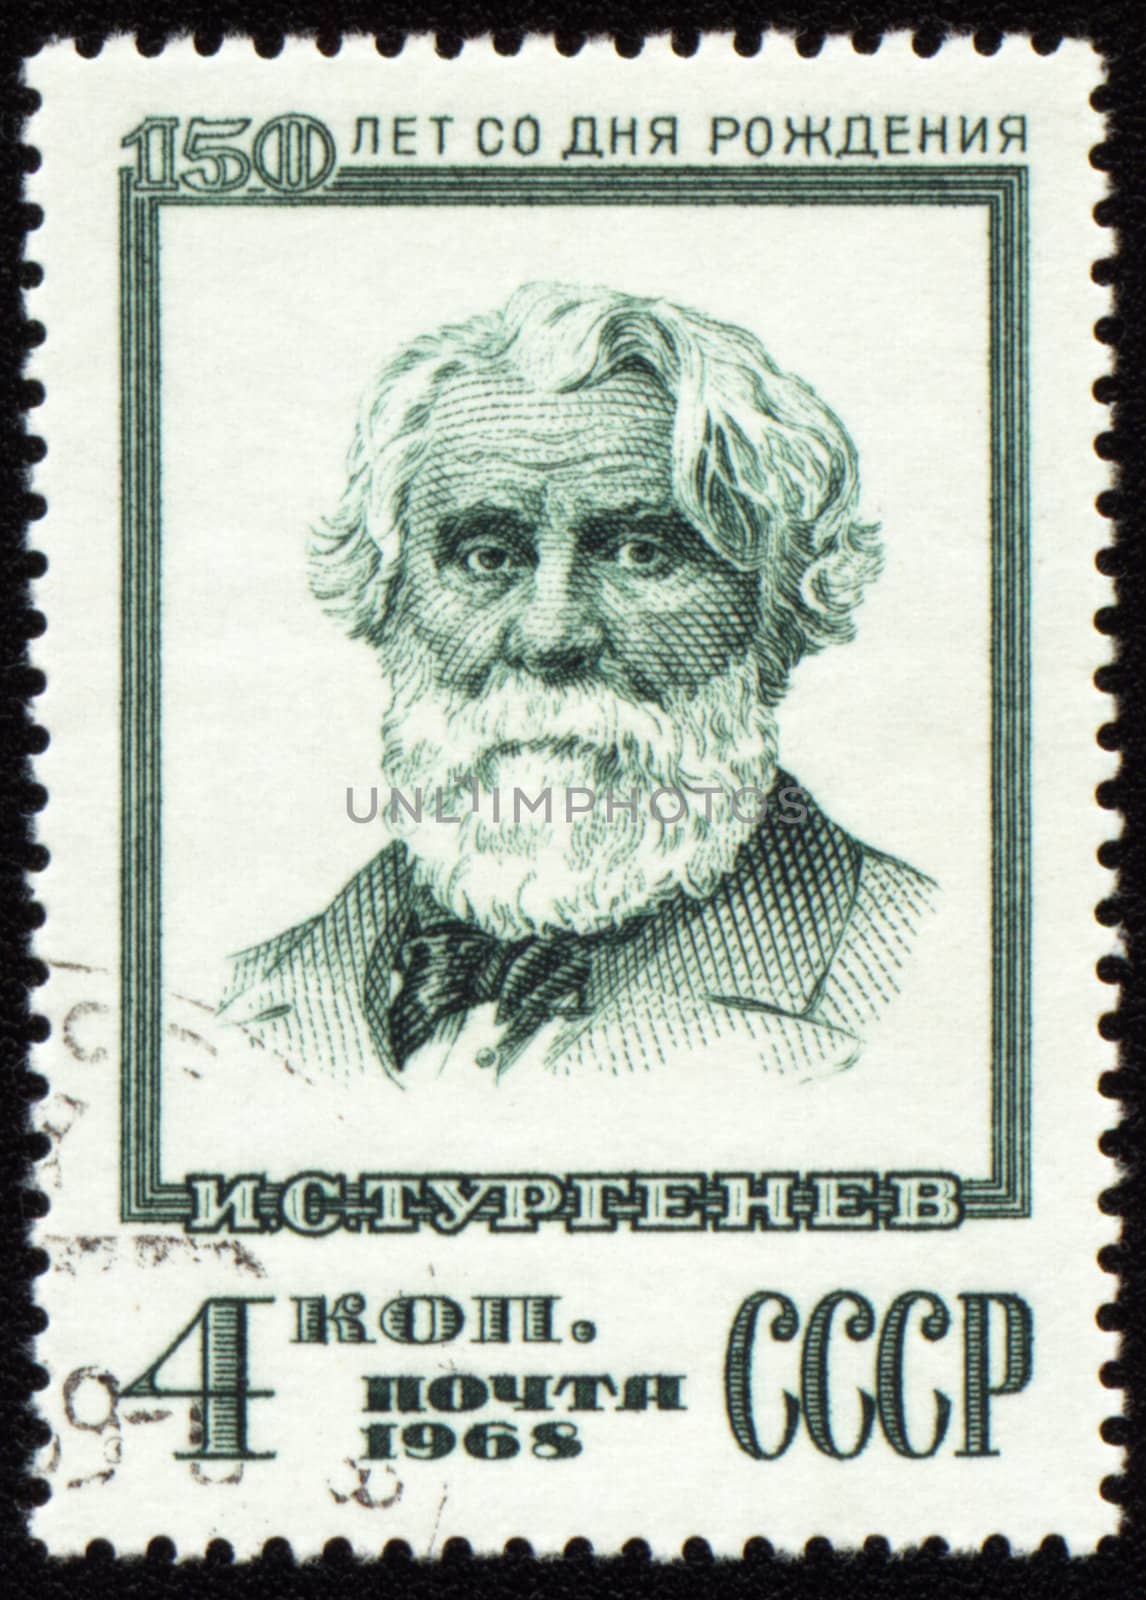 USSR - CIRCA 1968: post stamp printed in USSR and shows portrait of russian writer Ivan Turgenev (1818-1883), circa 1968